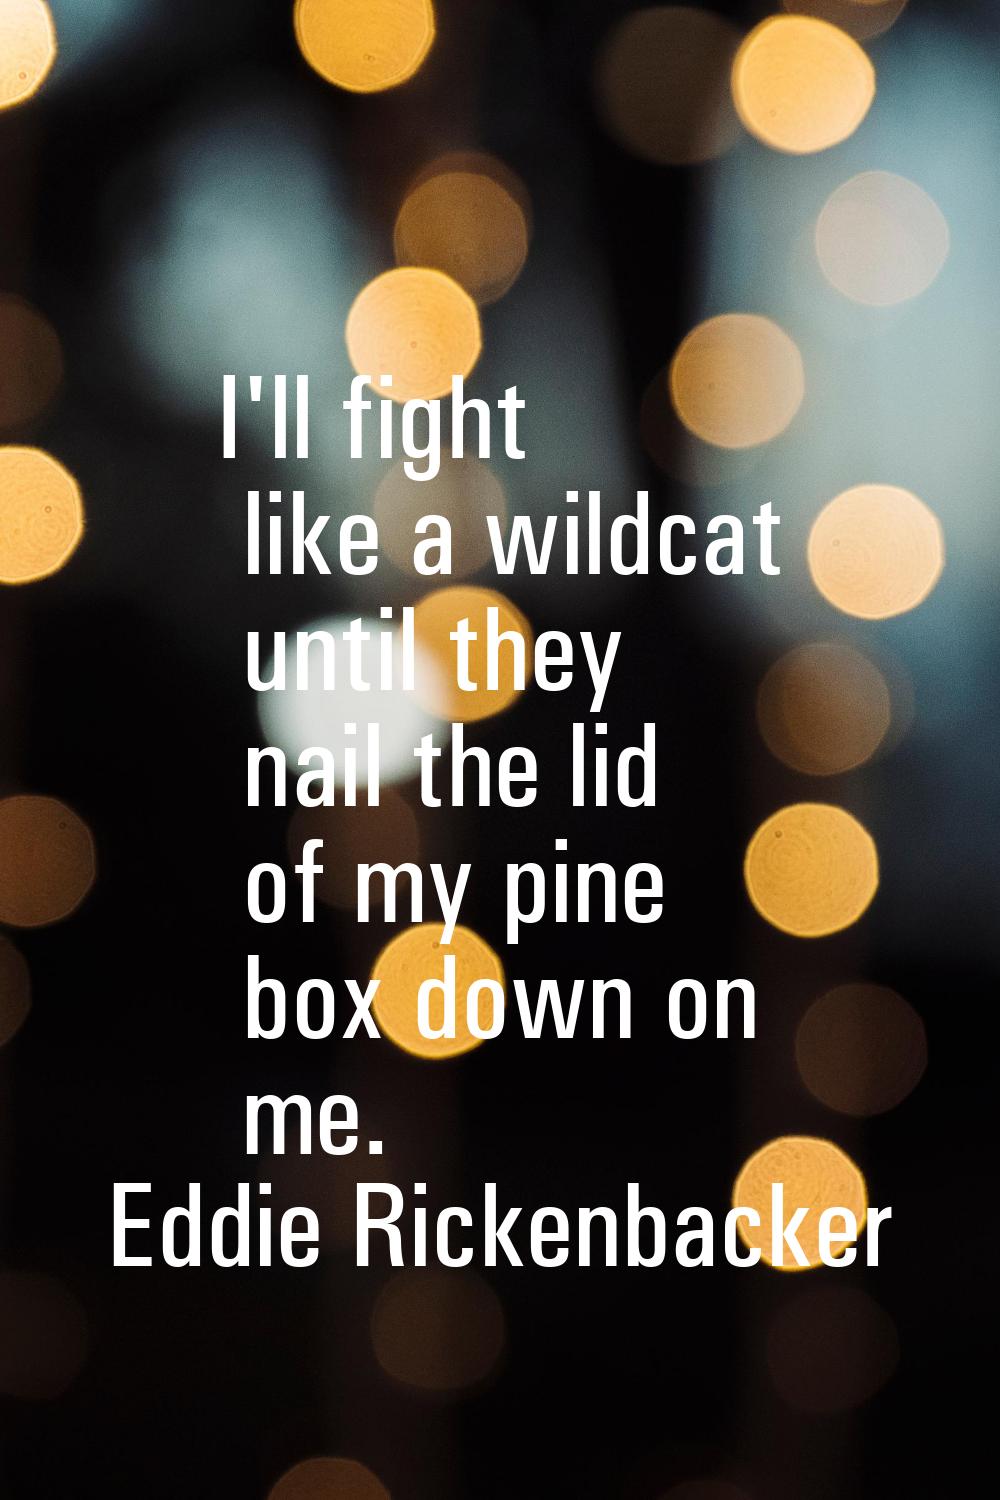 I'll fight like a wildcat until they nail the lid of my pine box down on me.